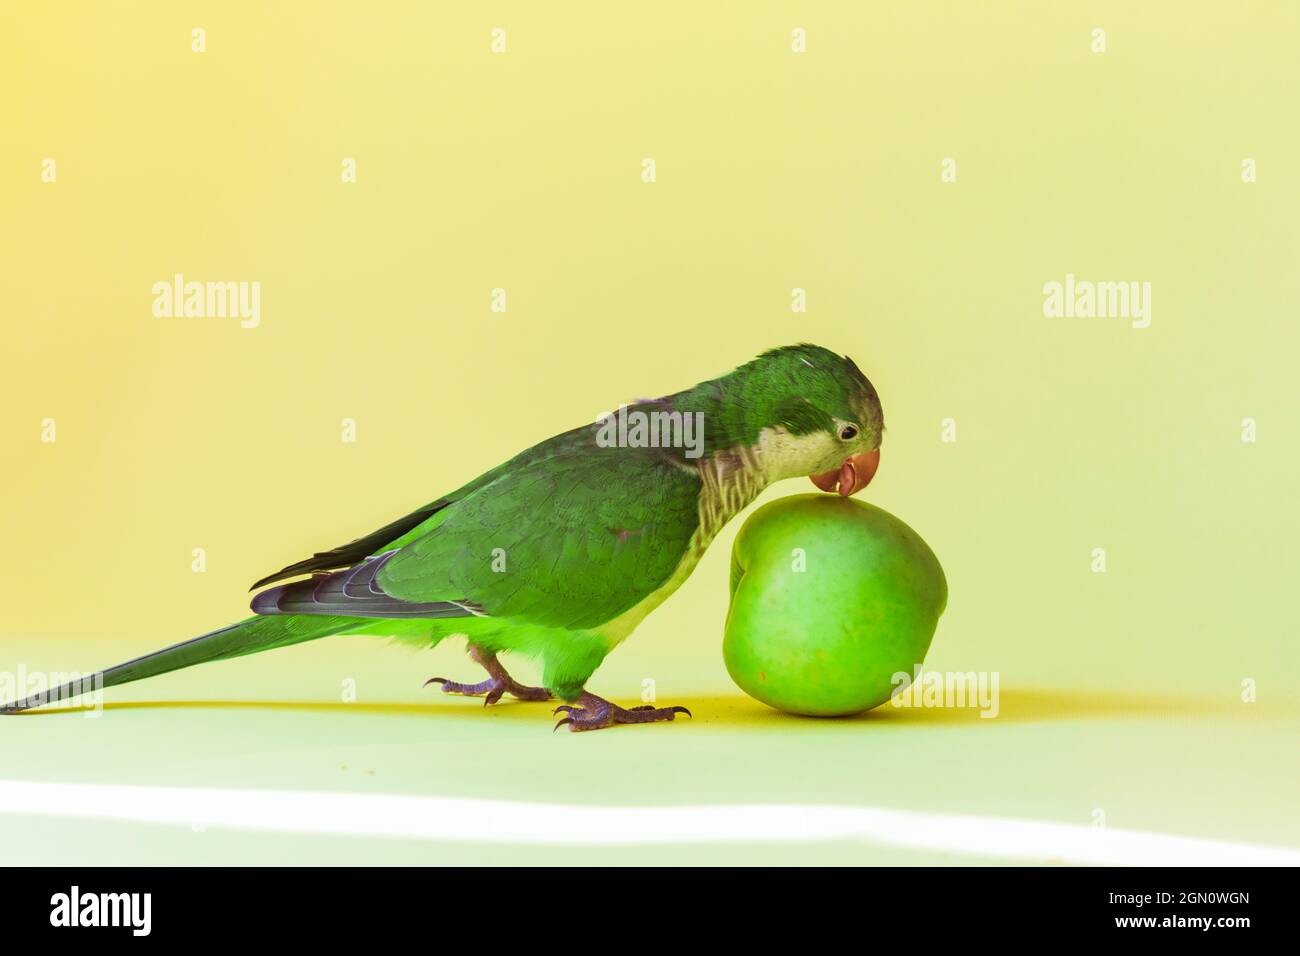 Green parrot monk breed eats a green healthy apple on a yellow background.  Stock Photo